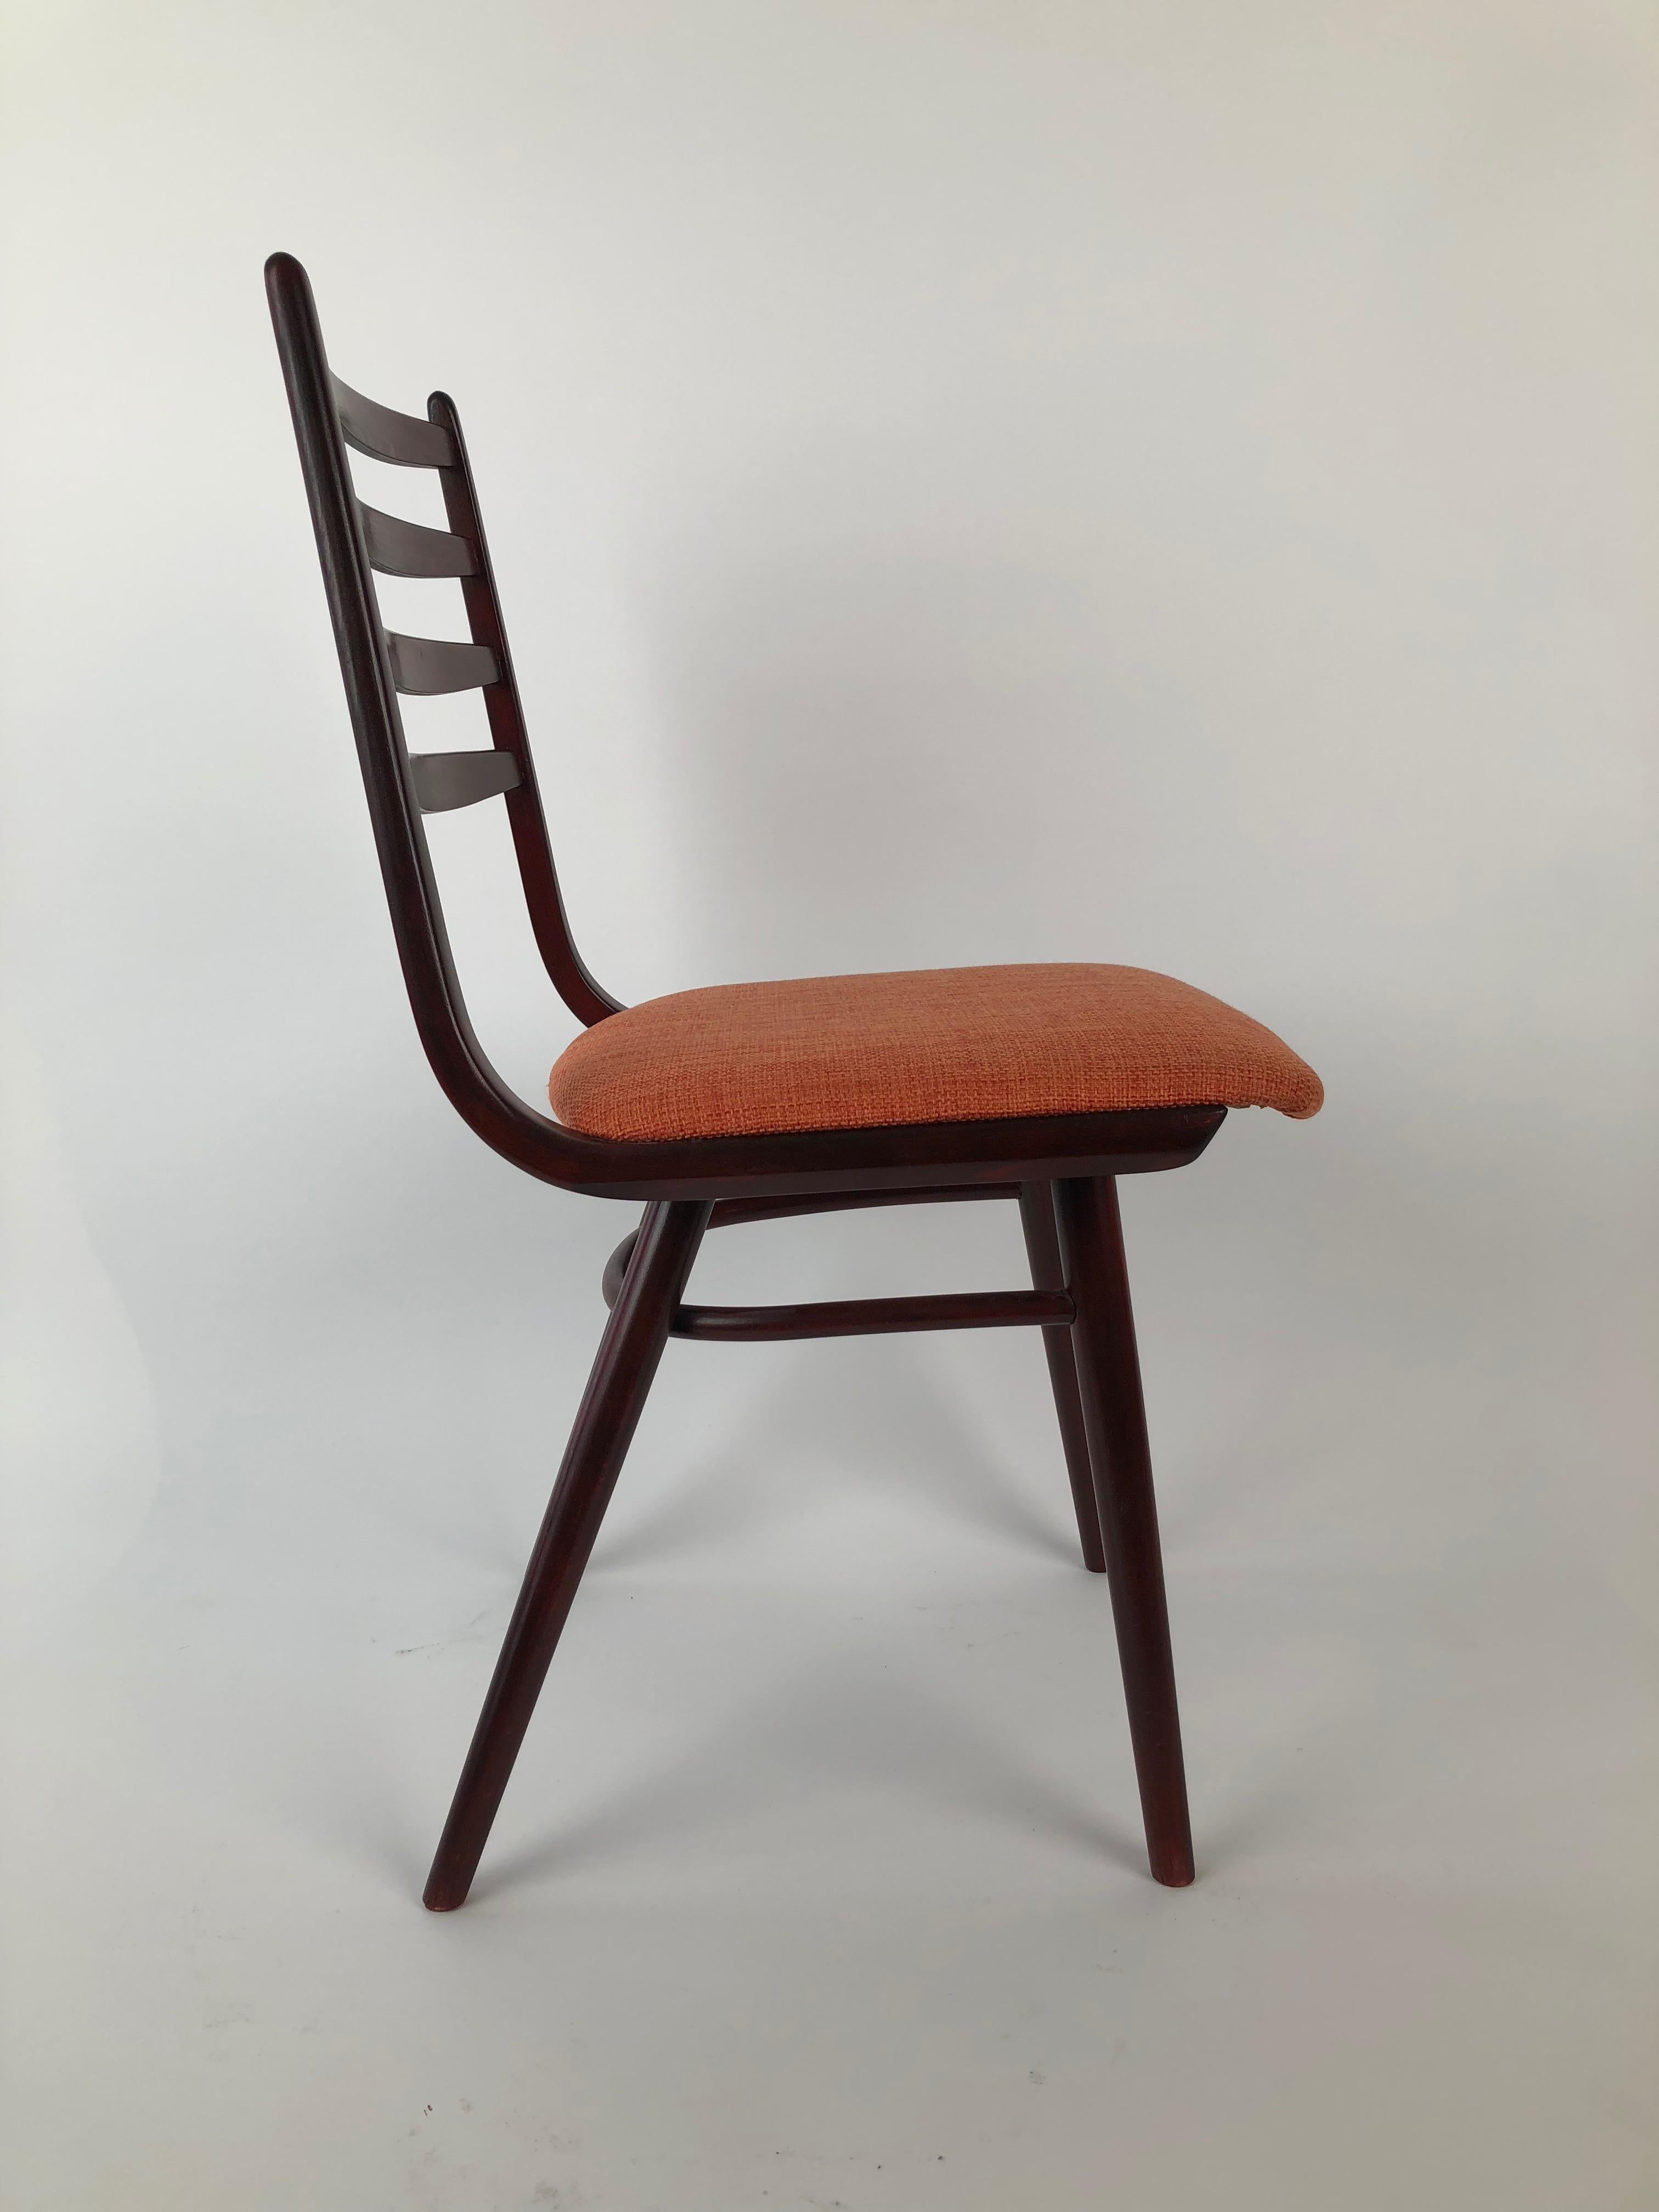 Czech Set of 4 Dinning Chairs, 1970's, Thonet Factory For Sale